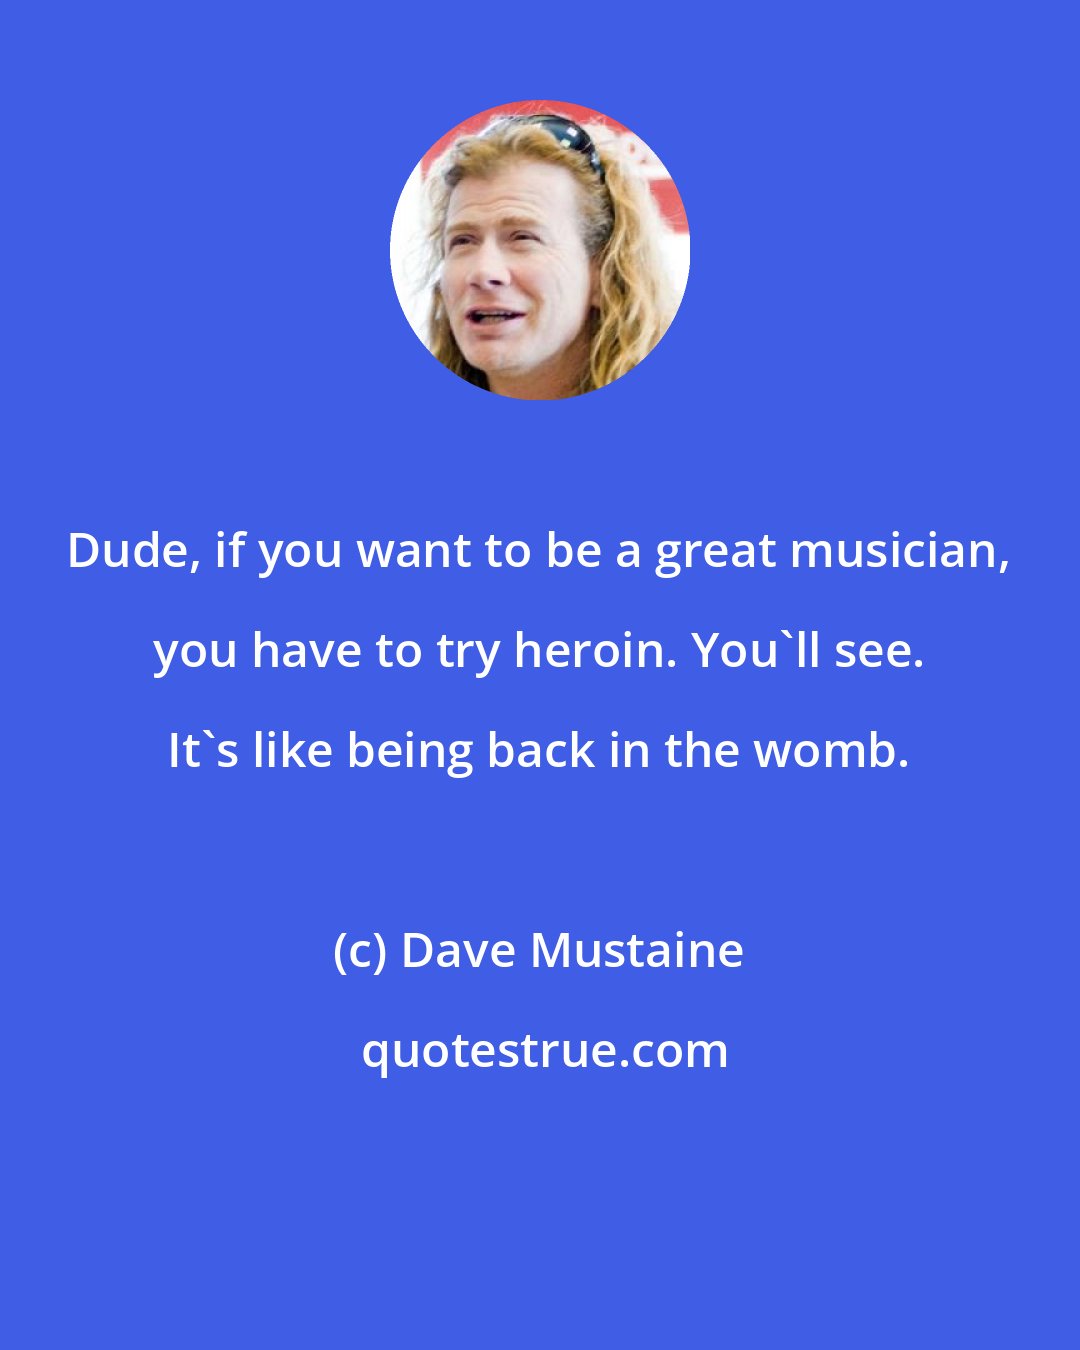 Dave Mustaine: Dude, if you want to be a great musician, you have to try heroin. You'll see. It's like being back in the womb.